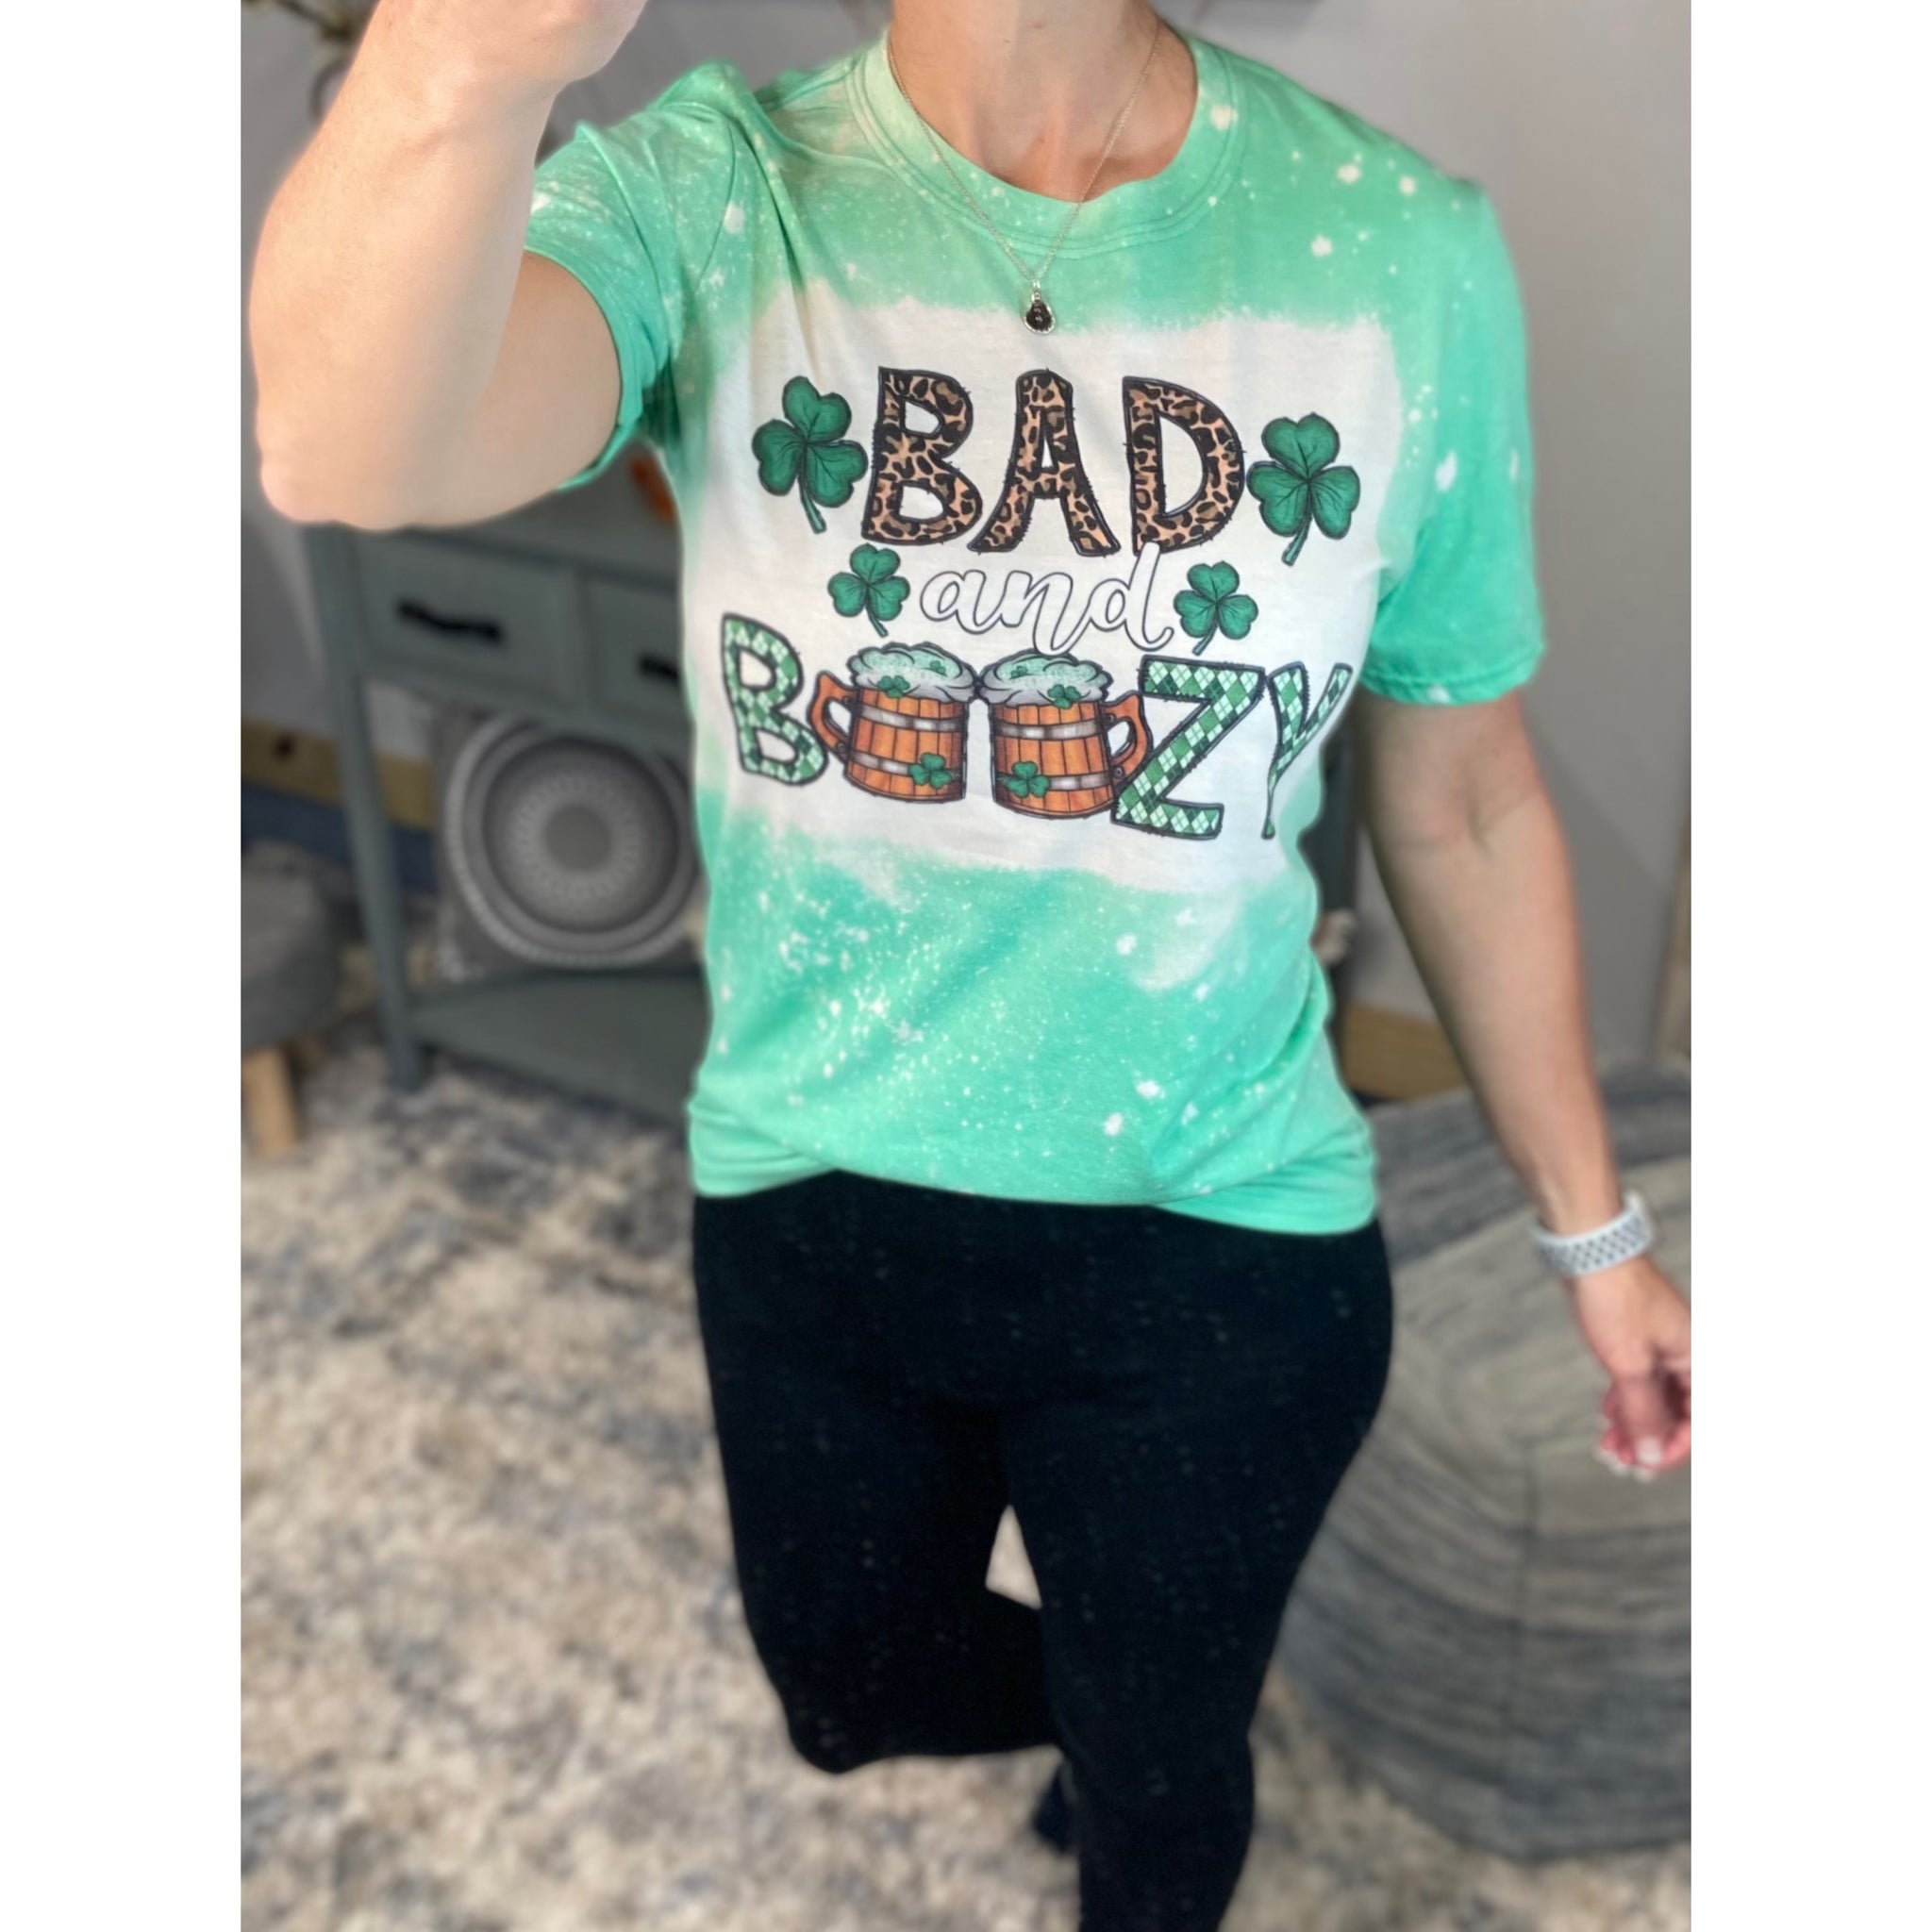 “Bad and Boozy” St. Patrick’s Day Bleached Sublimation Boyfriend Basic Tee Shirt Green S/M/L/XL/2X